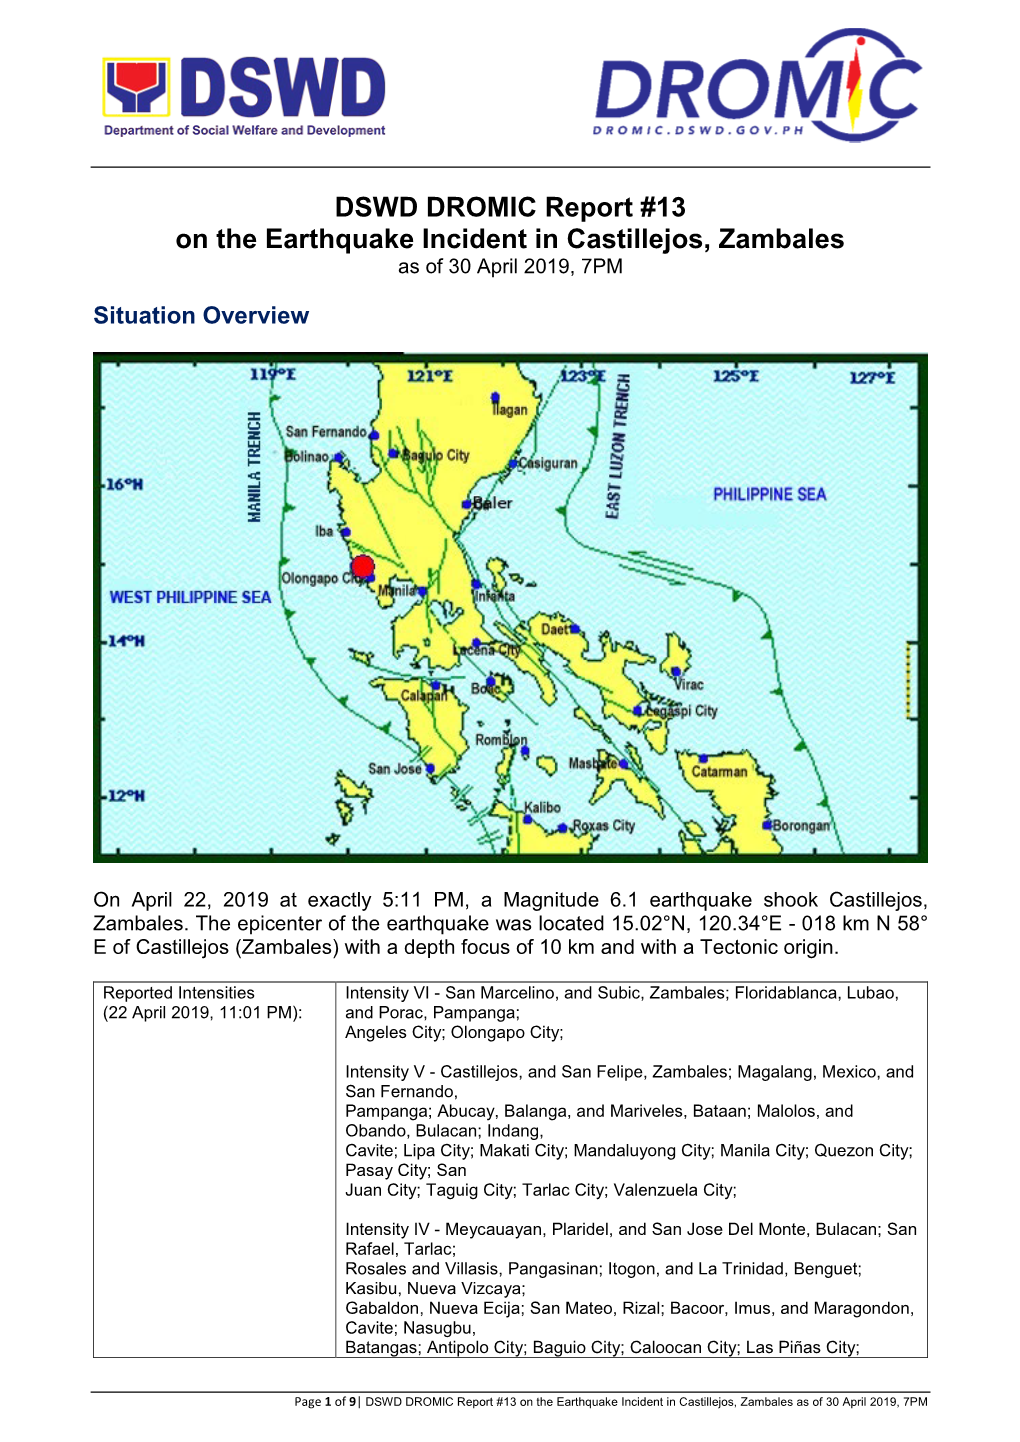 DSWD DROMIC Report #13 on the Earthquake Incident in Castillejos, Zambales As of 30 April 2019, 7PM